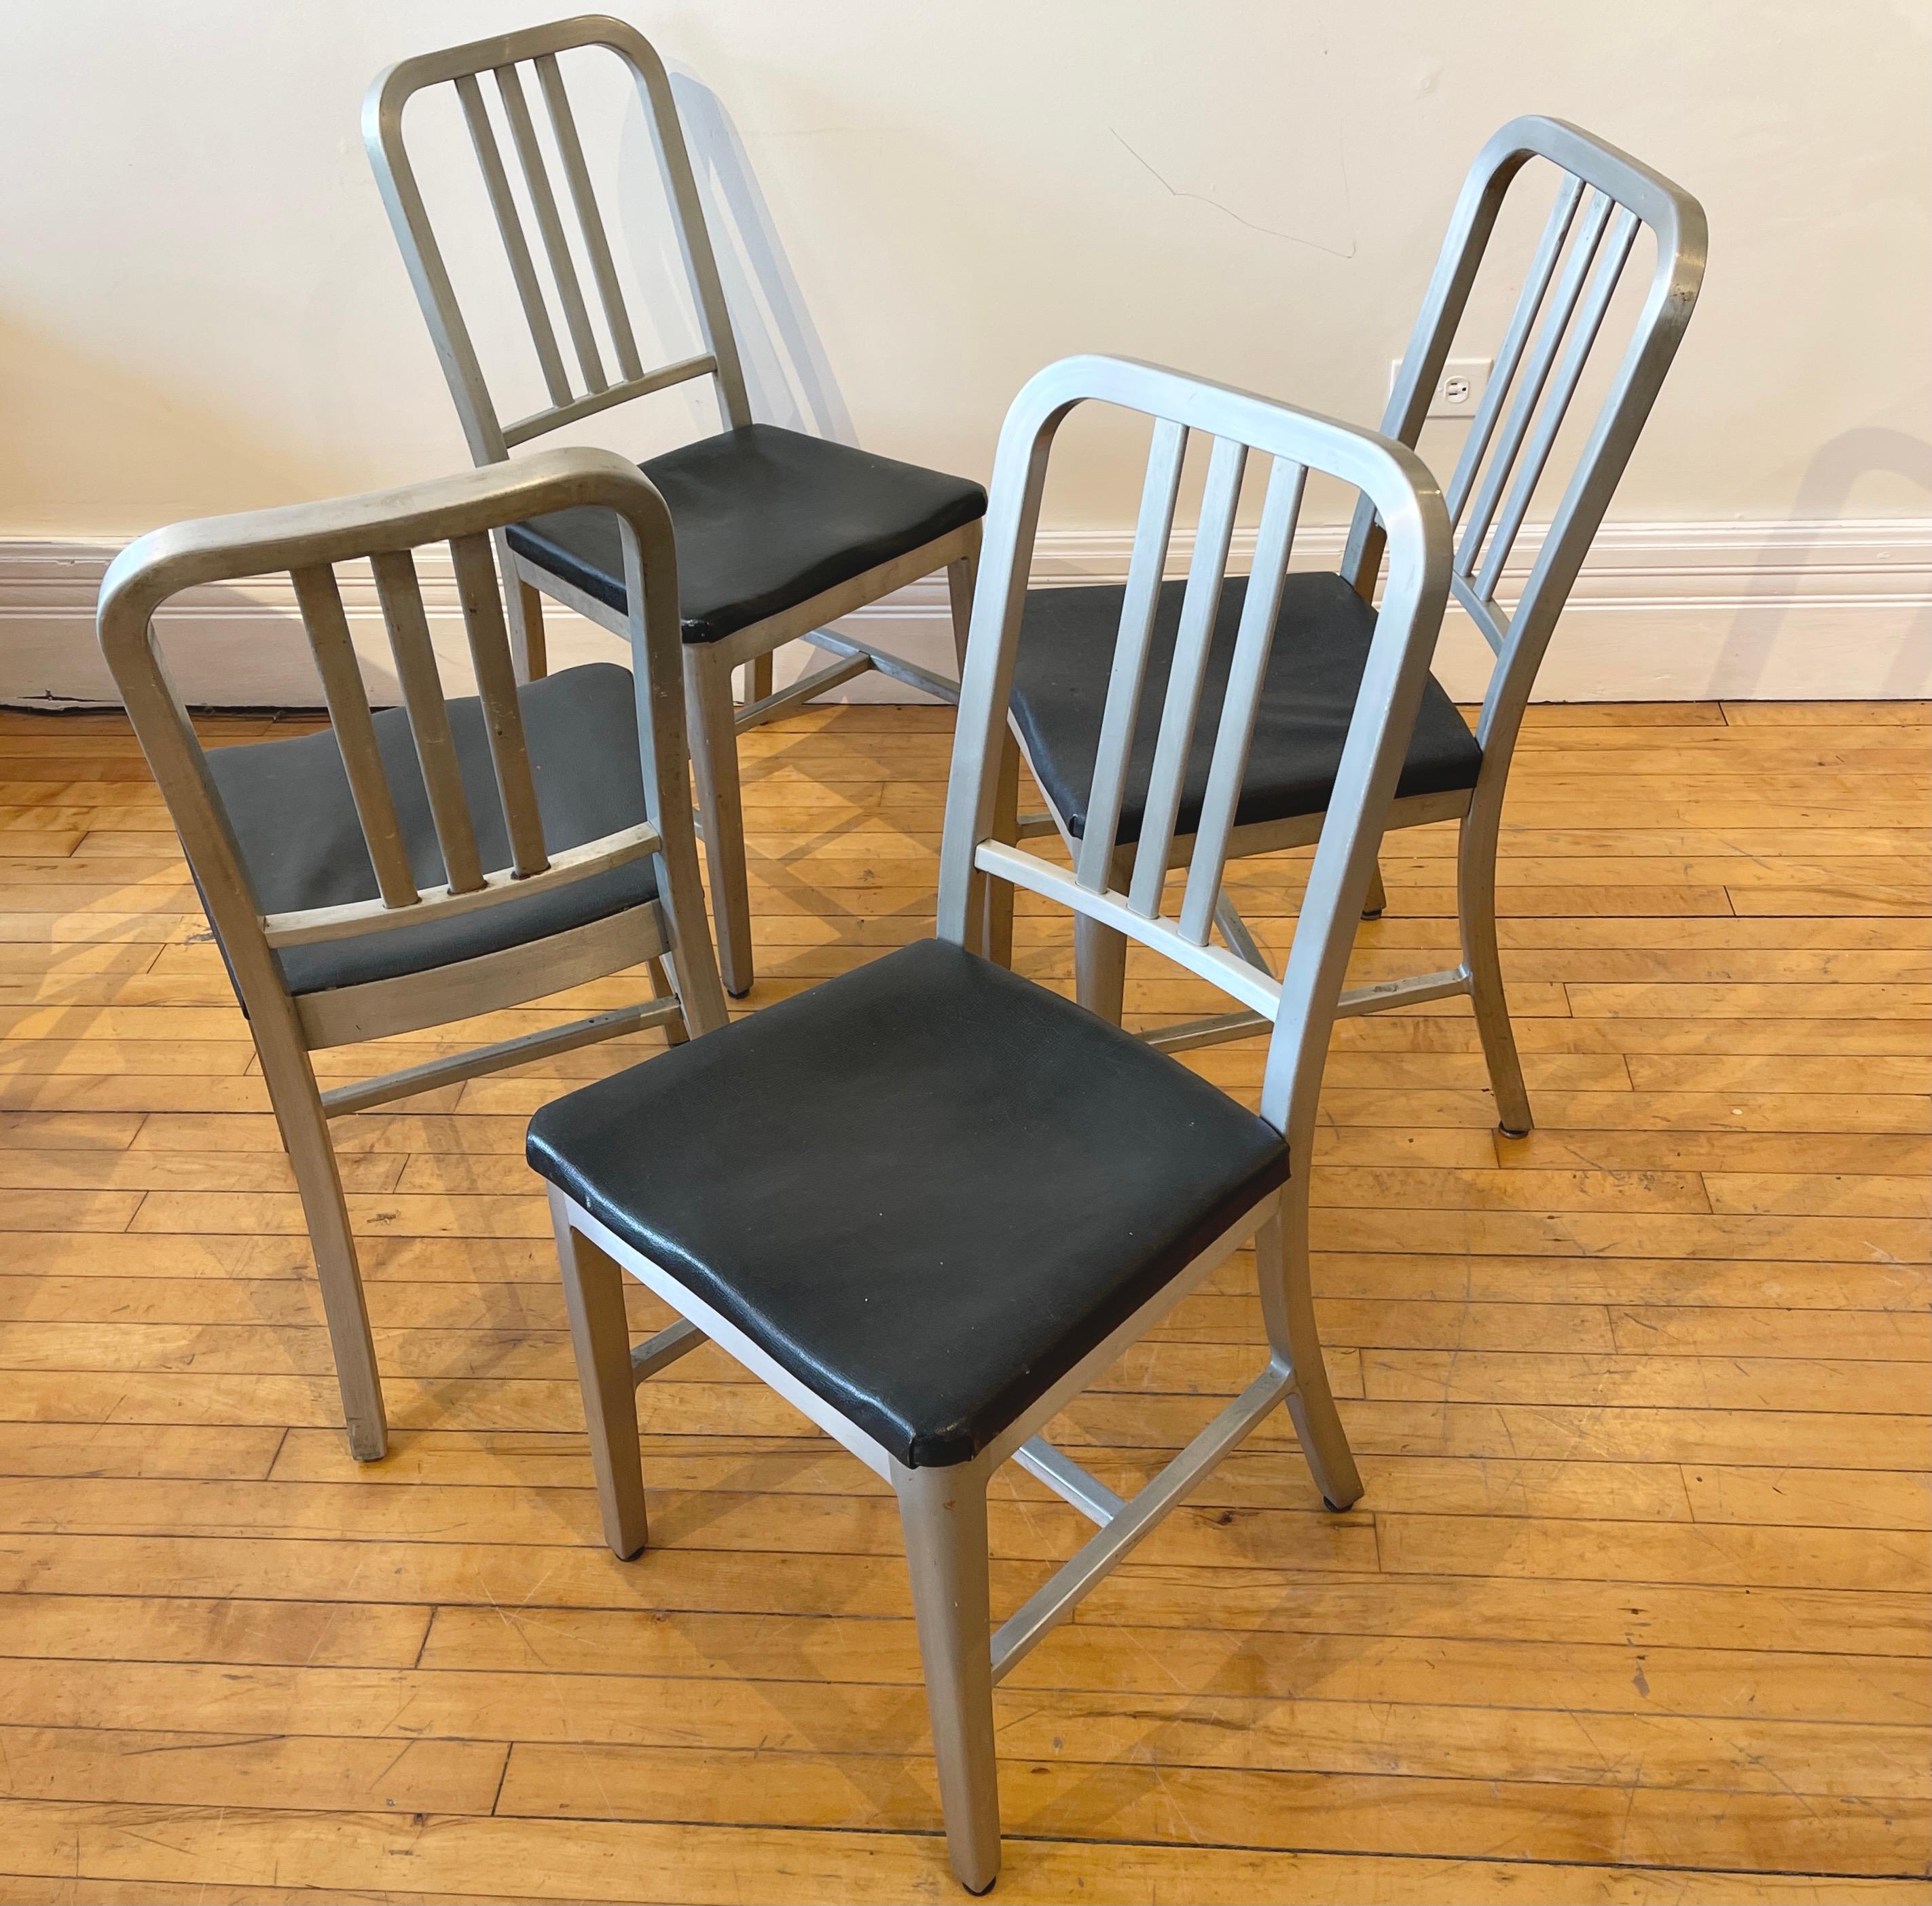 Early Original Navy Chairs by Goodform / General Fireproofing 60 Available 3